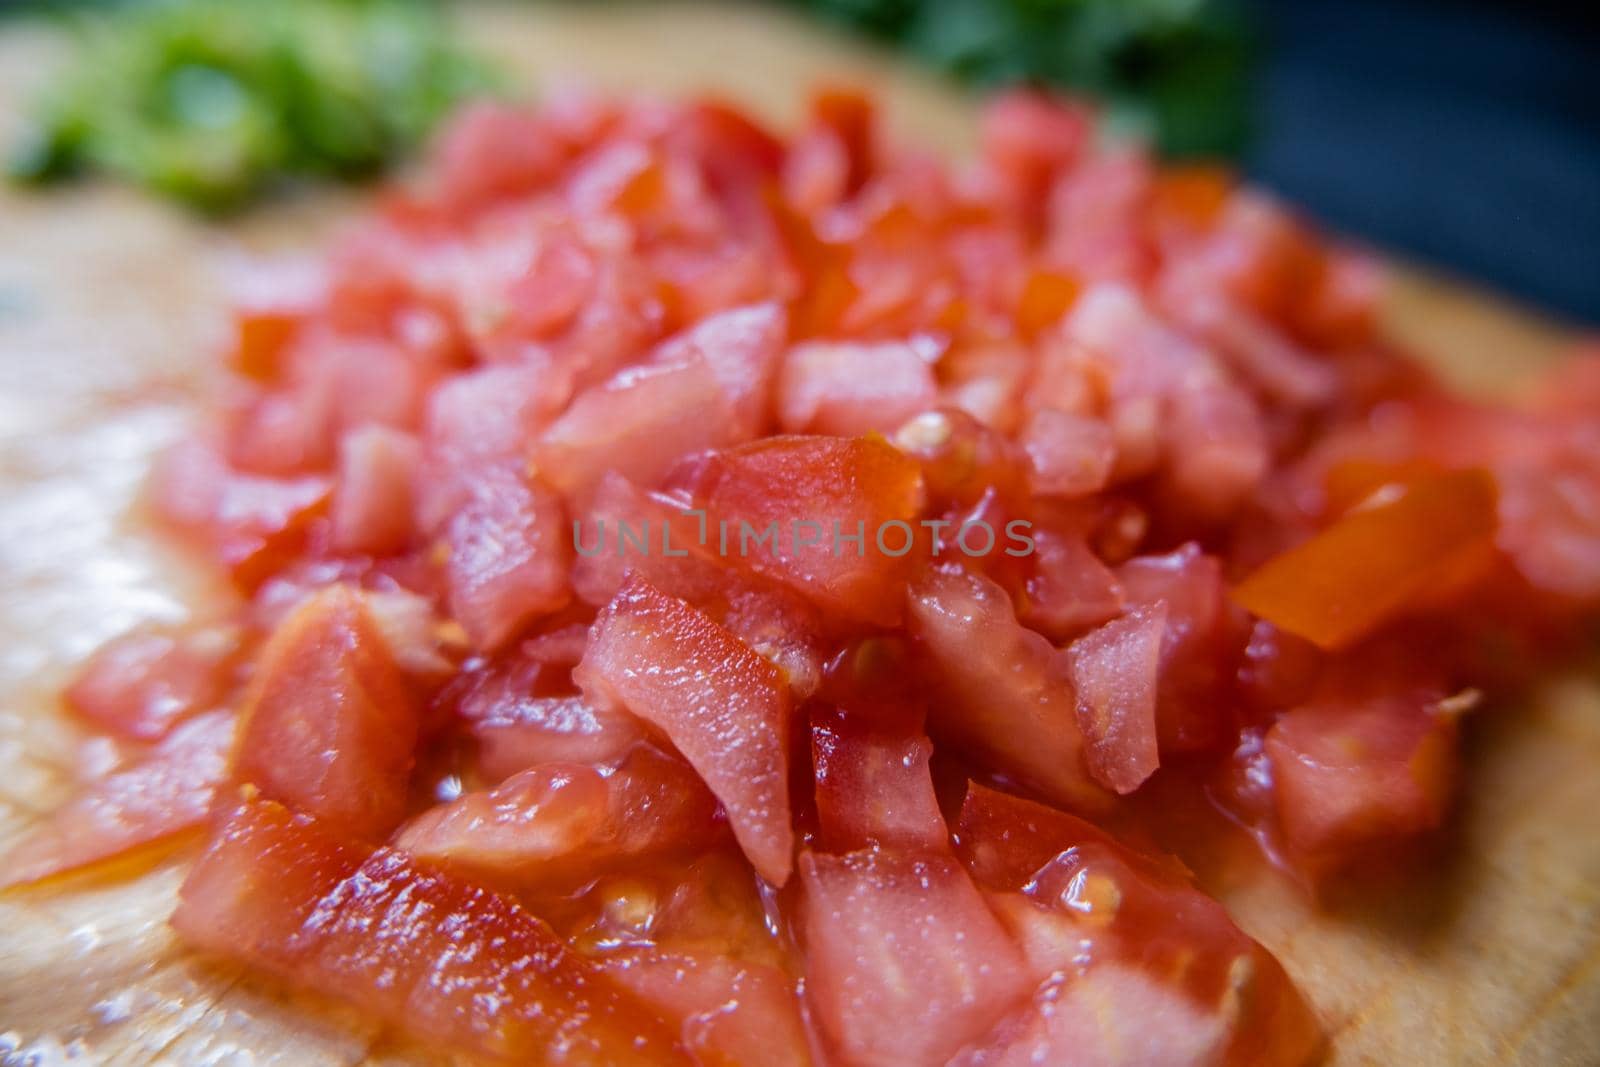 Close-up of fresh chopped tomatoes on wooden cutting table with chili pepper slices as background. Juicy red vegetables cut into pieces above wood surface. Healthy snack preparation